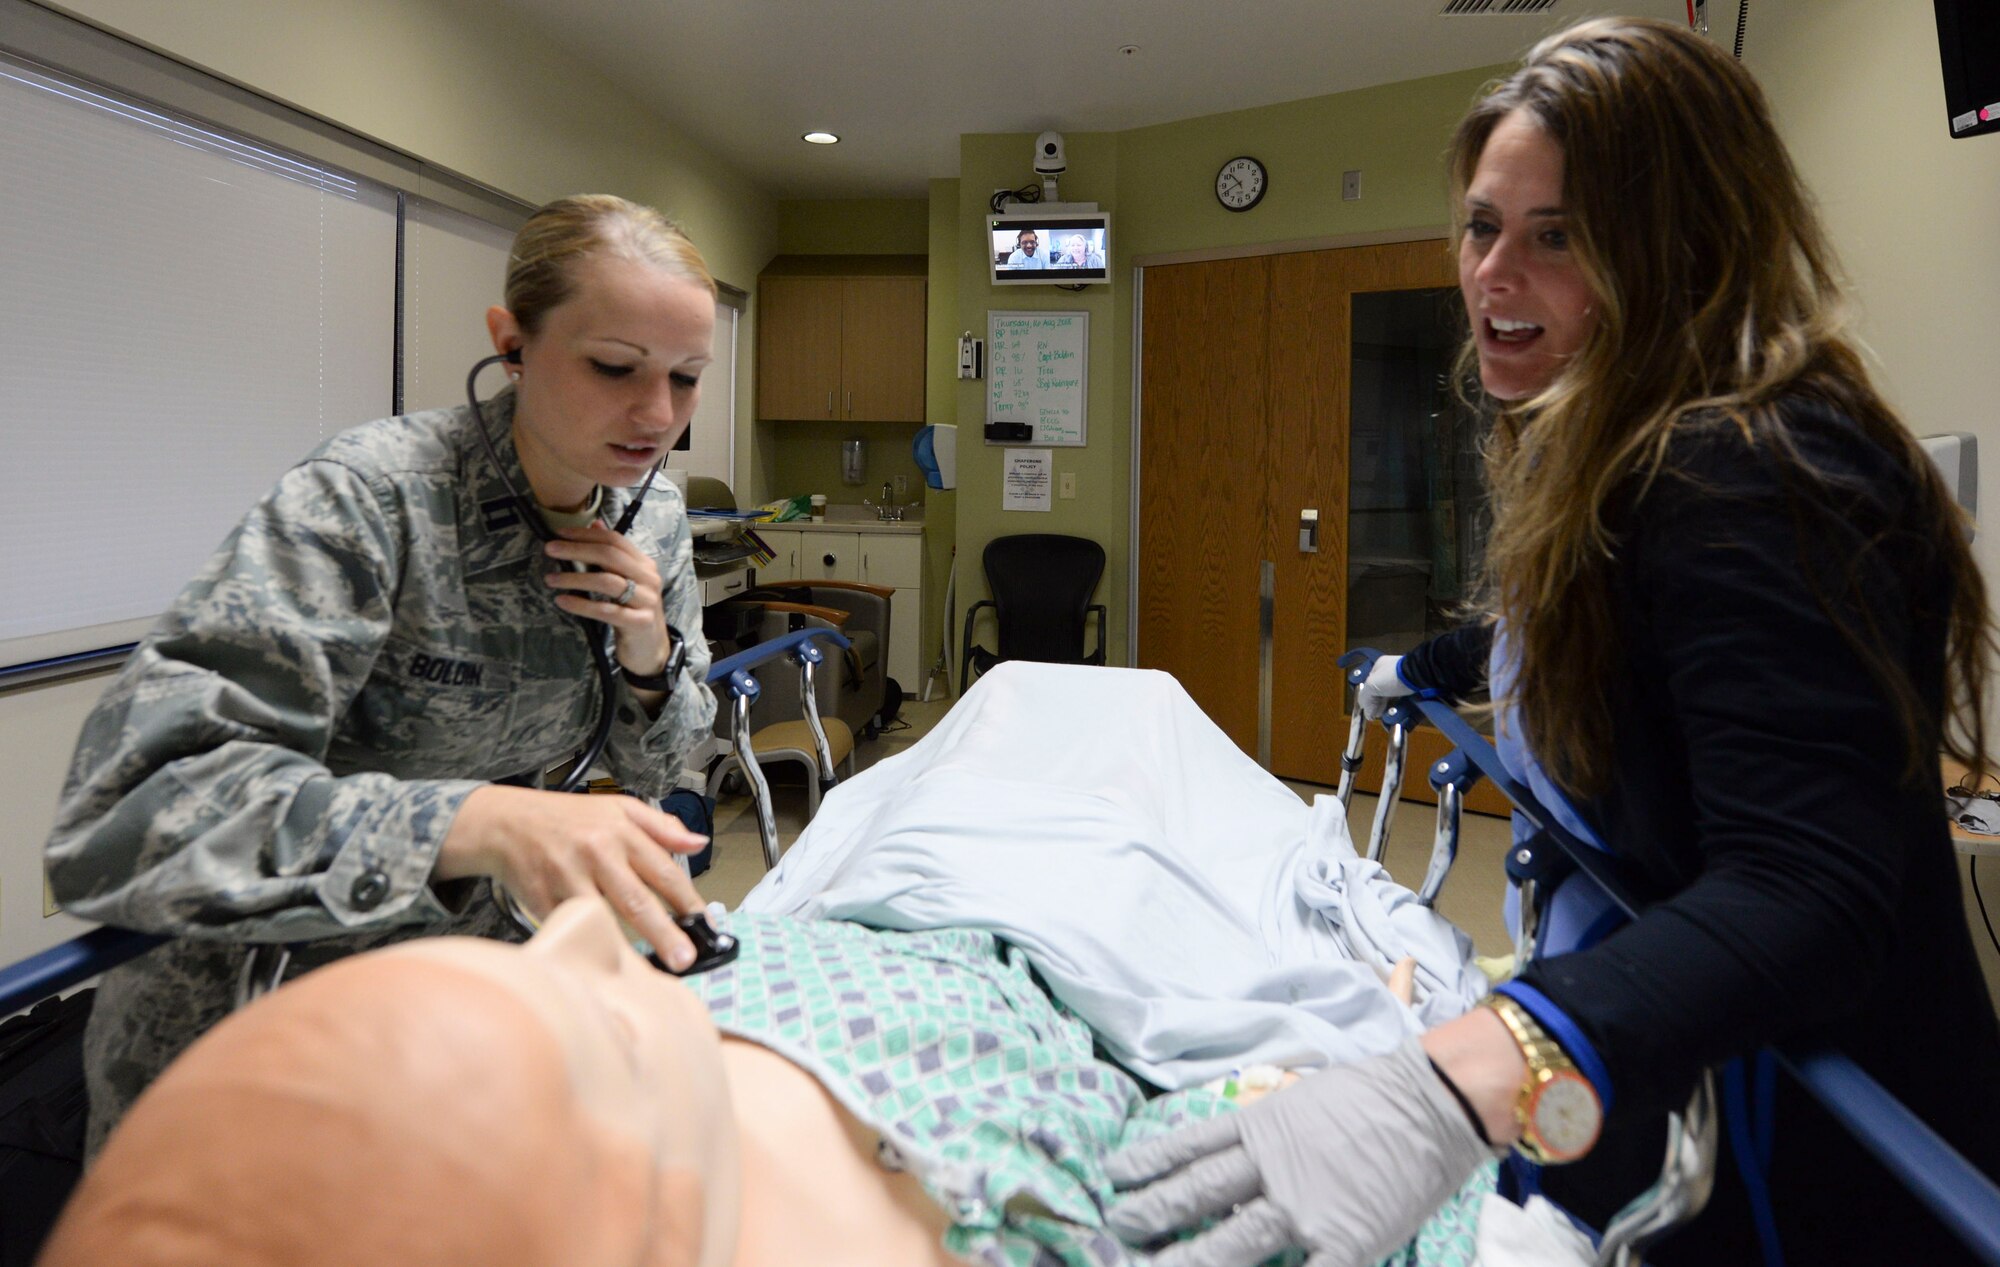 Capt. Genevieve Boldin, 99th Inpatient Squadron registered nurse, and Katie Phillips, a VA critical care simulation coordinator/educator, conduct a training class using the VA Tele-ICU system at Mike O’Callaghan Military Medical Center Intensive Care Unit, Nellis Air Force Base, Nev.,  Aug. 16, 2018. To contact the VA Tele-ICU nurses for assistance, patients and medical center staff must press the green “eLert” button located on the wall in the room. (U.S. Air Force photo by Airman Bailee A. Darbasie)